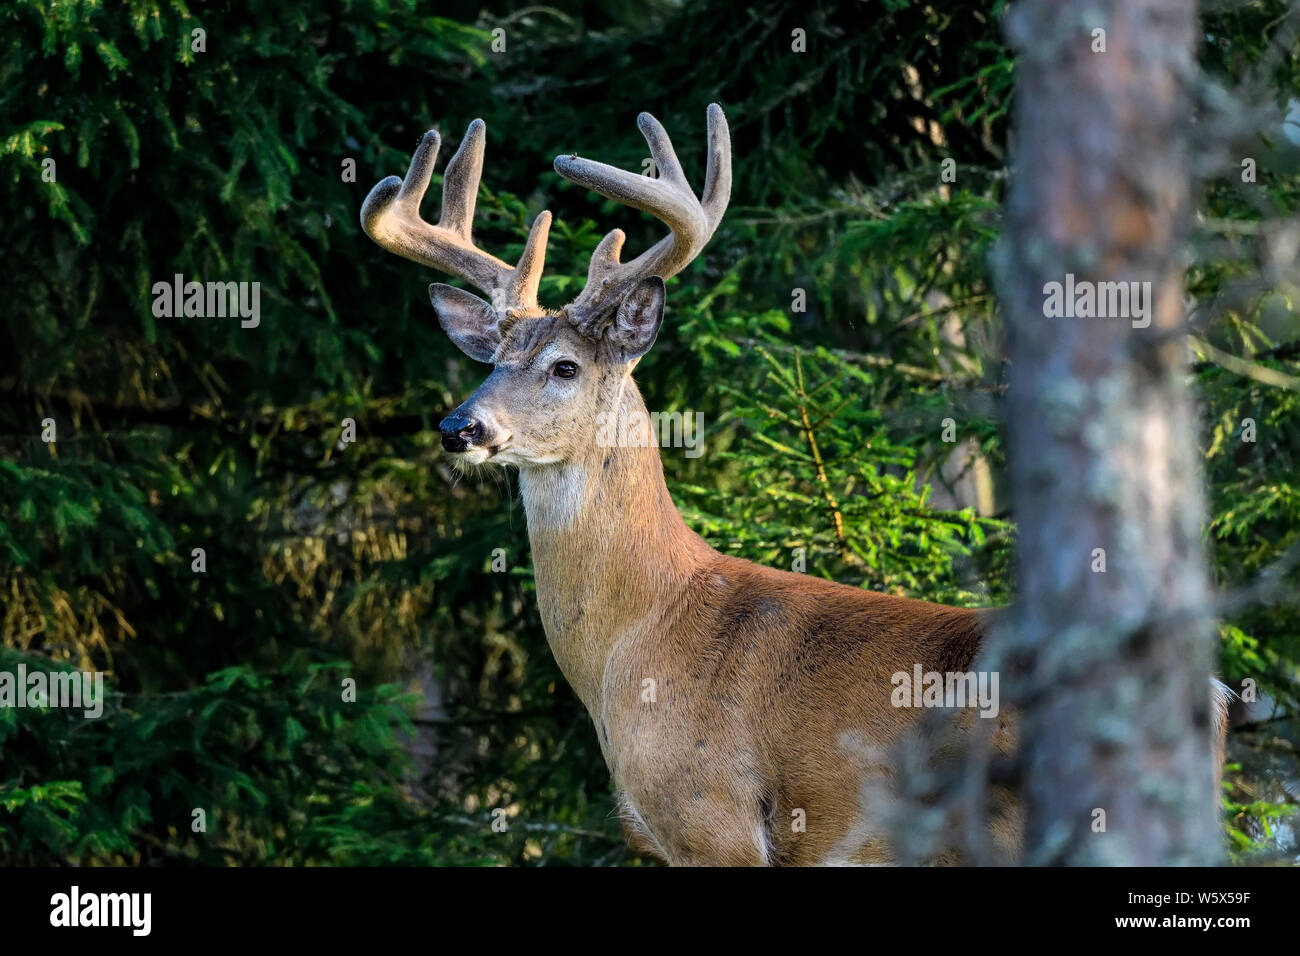 White-tailed deer in the forest looking majestic. Stock Photo